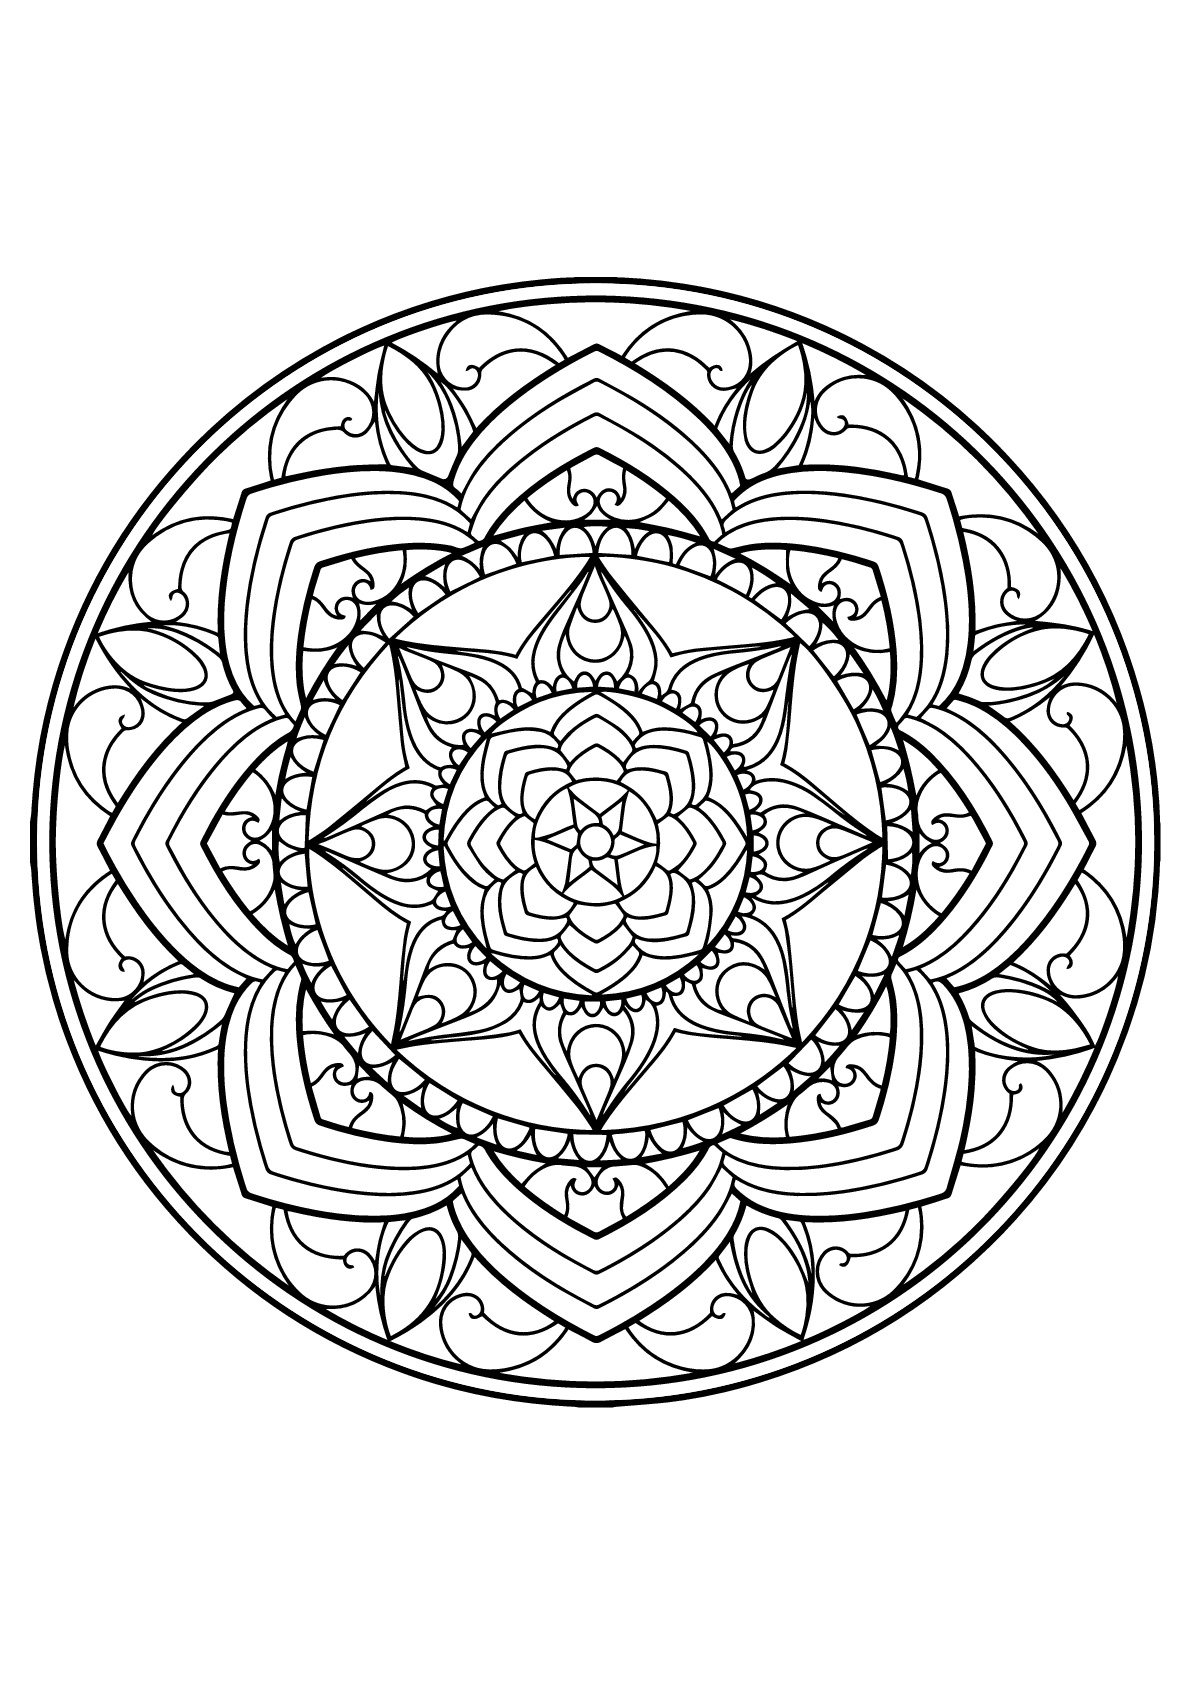 Mandala with cute patterns from Free Coloring book for adults